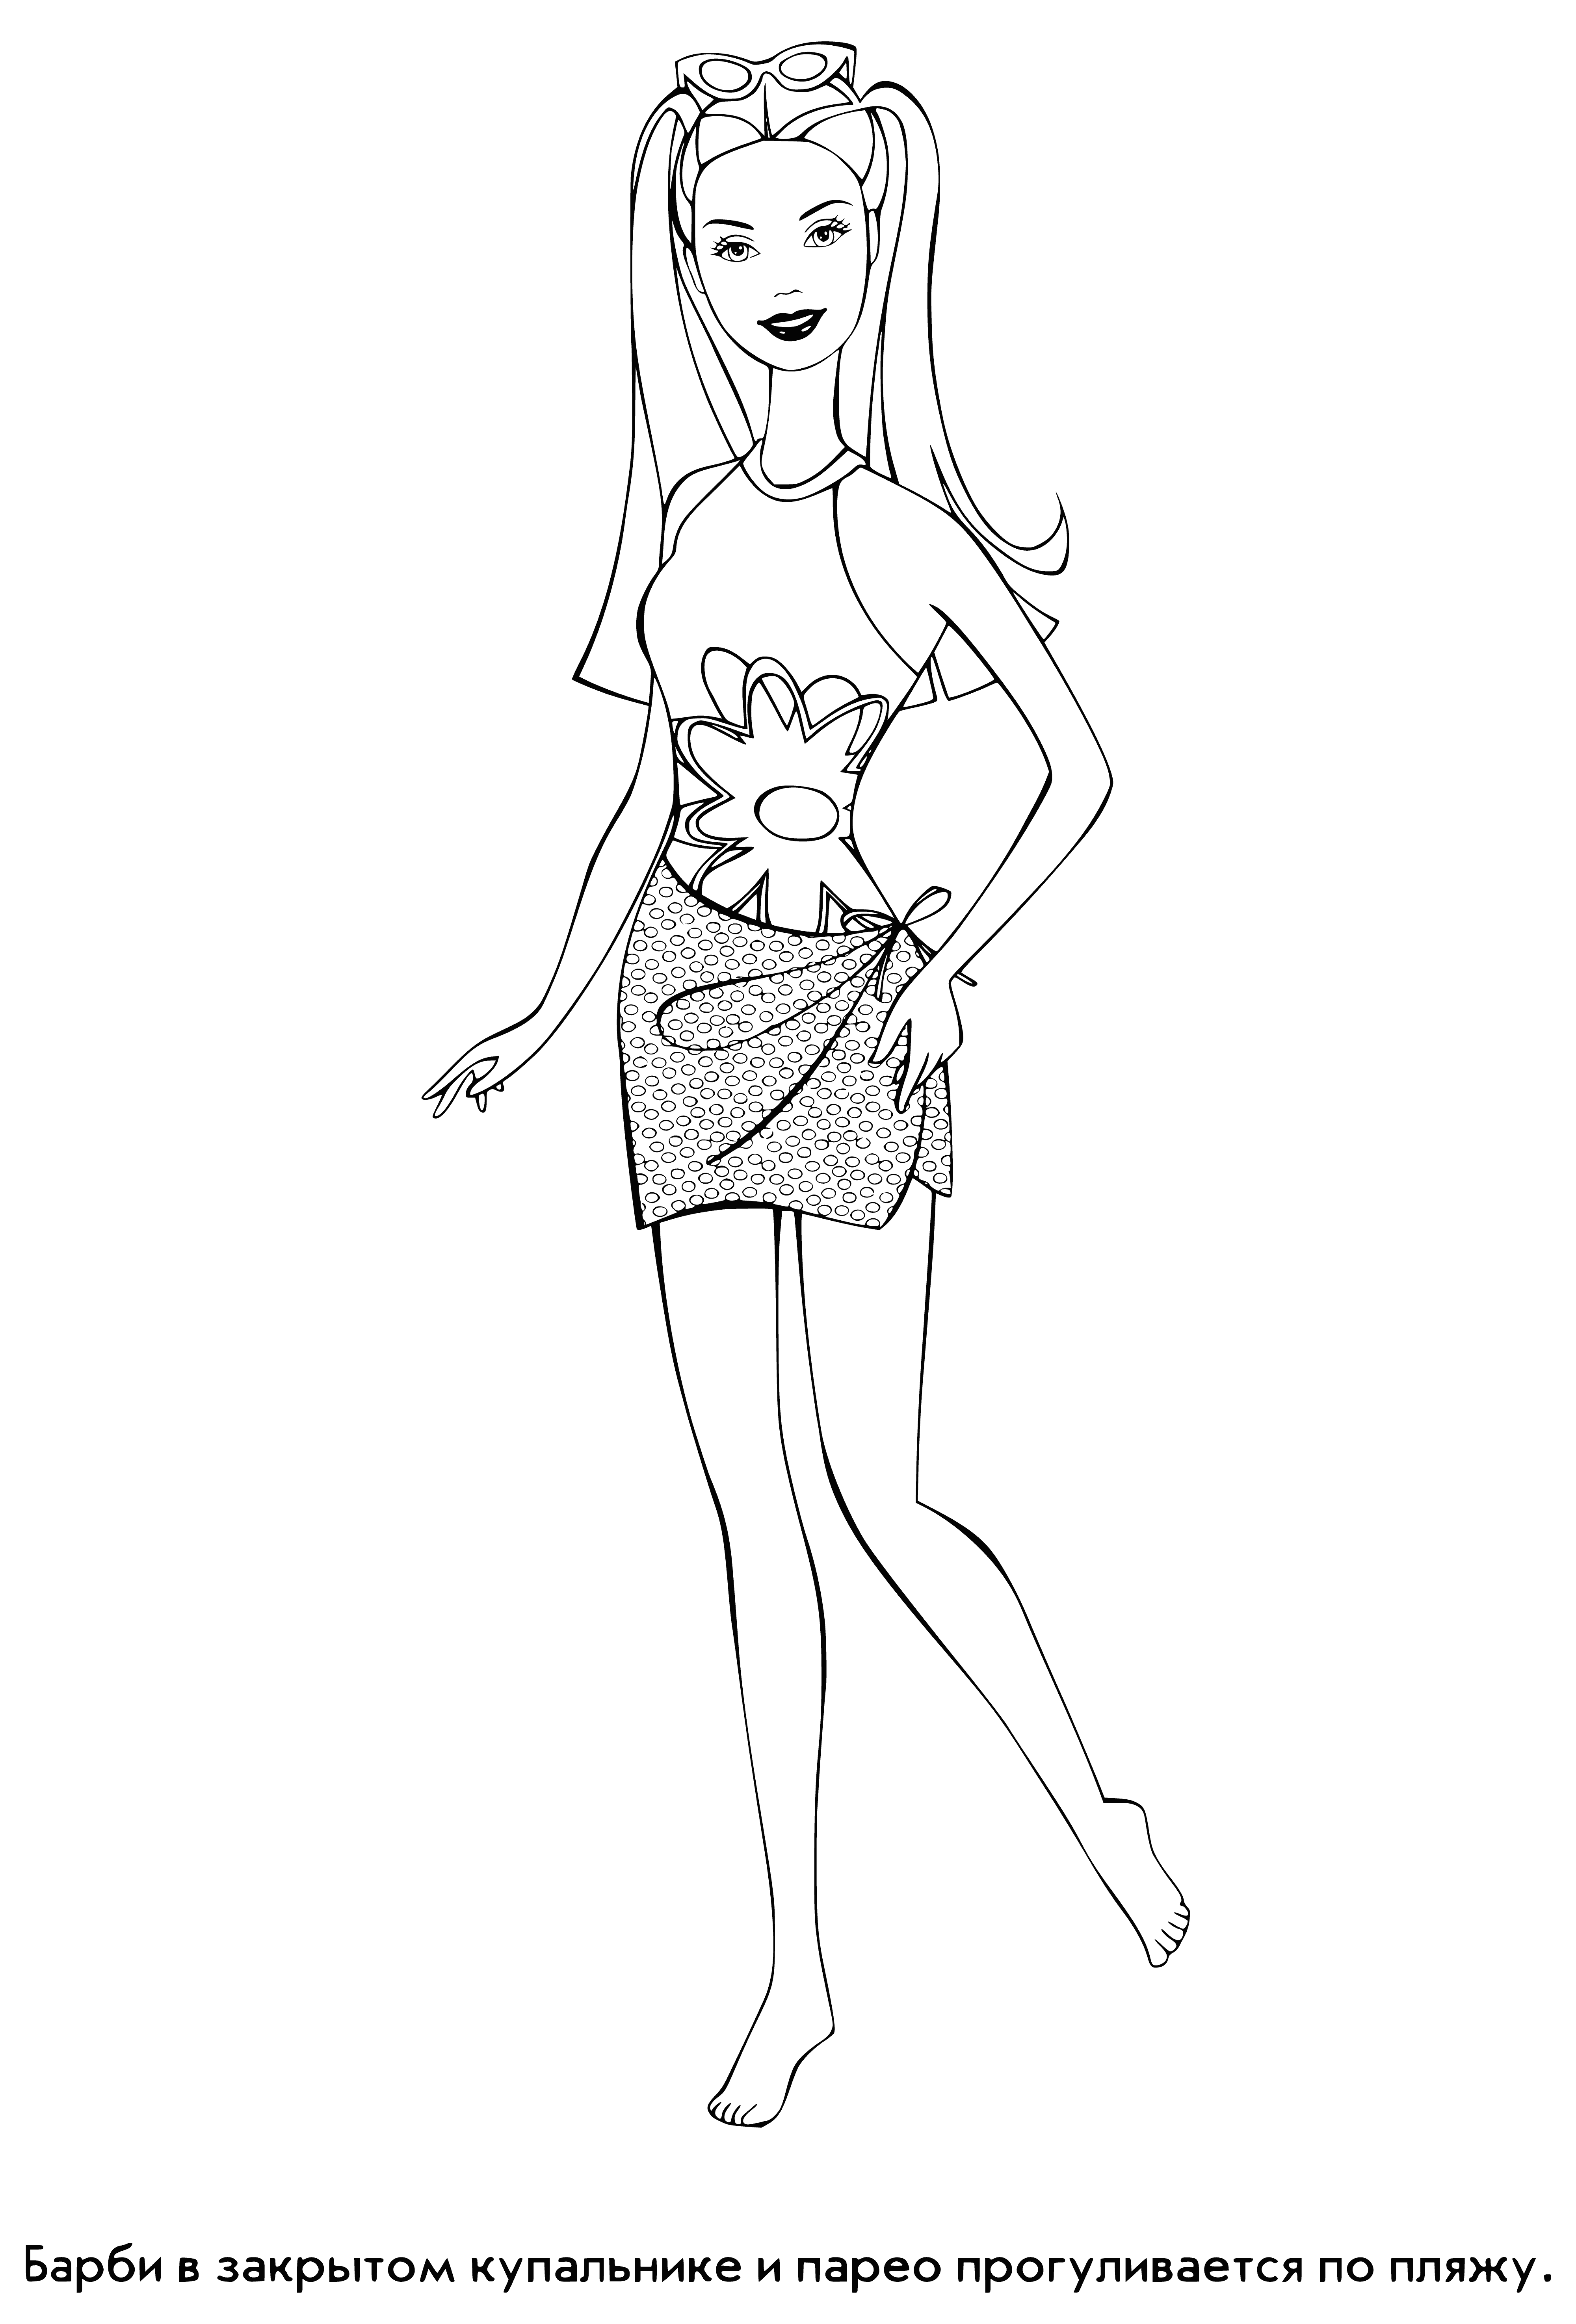 coloring page: Barbie sports a pink dress, side ponytail, pink high heel shoes & small flower earrings in this coloring page.